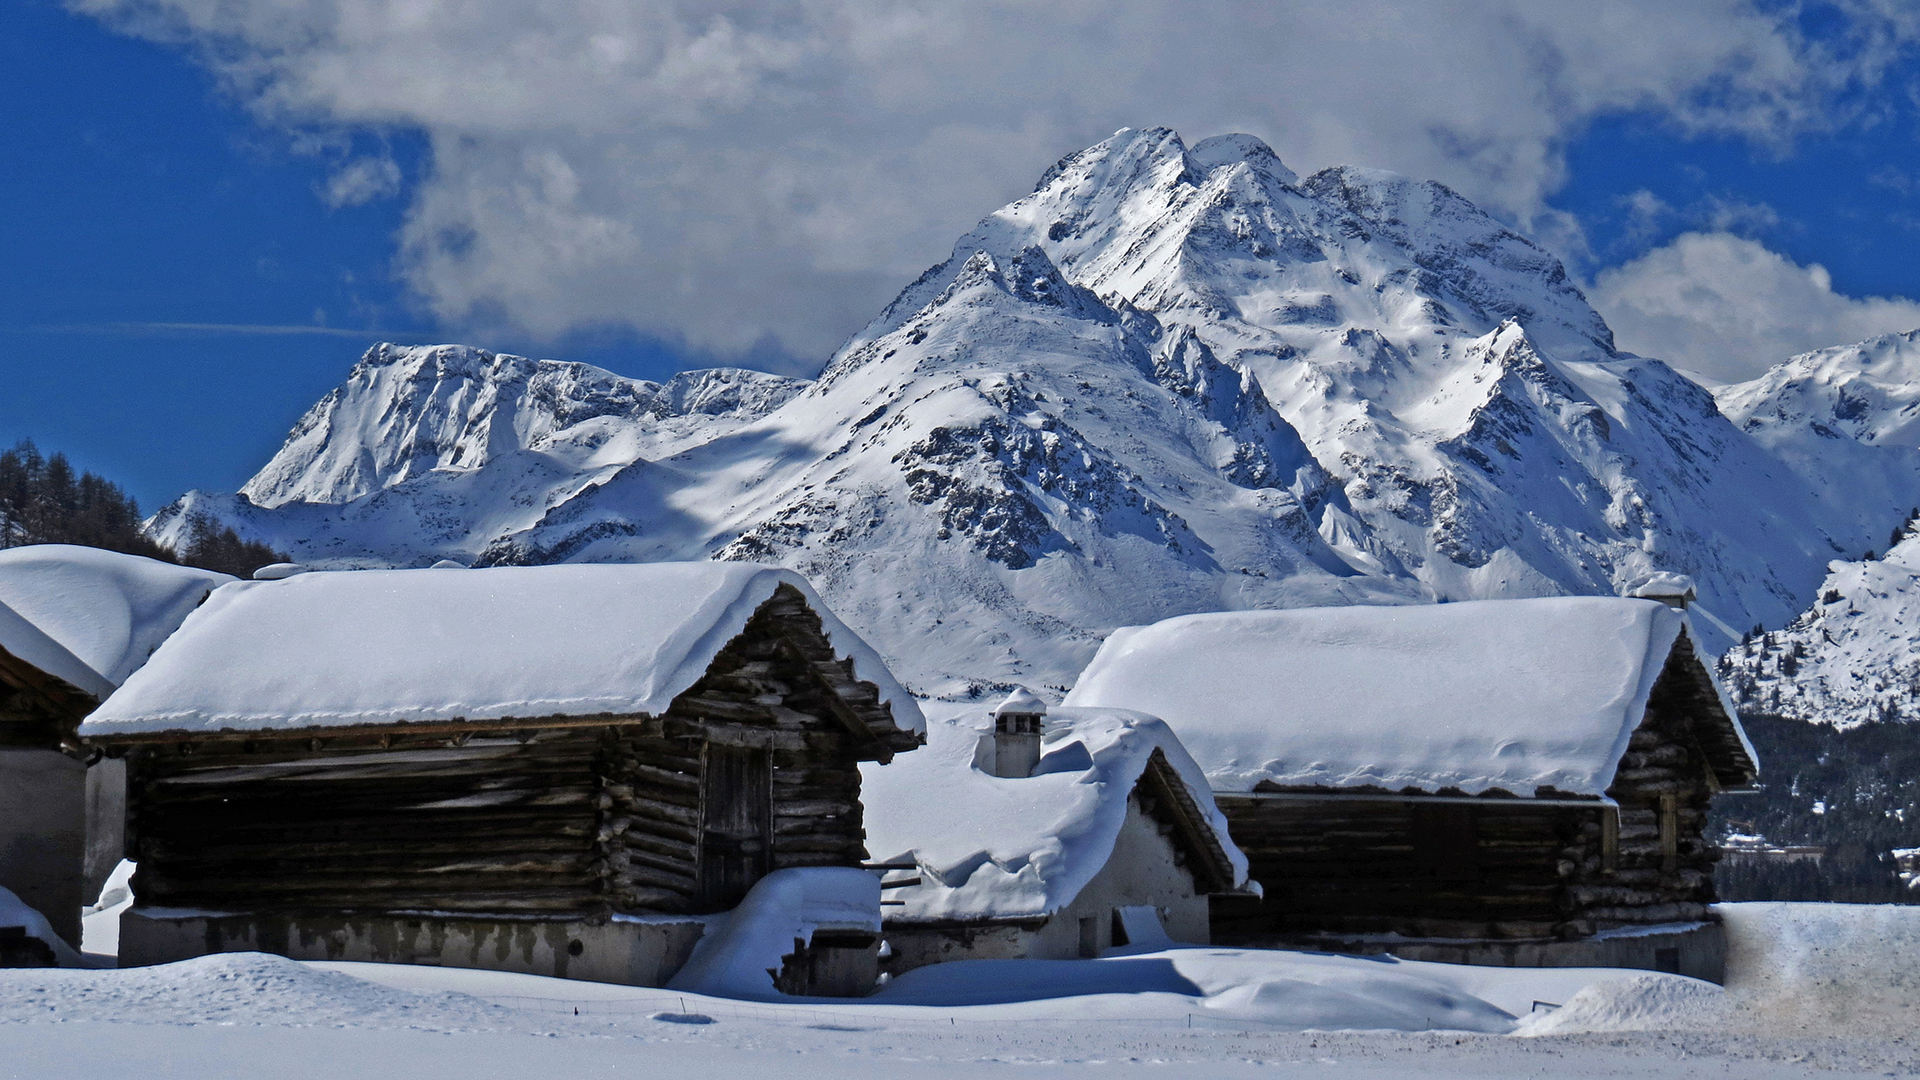 cabin, Mountain, Snow, Winter, Buildings, Houses, Landscapes, Sky, Clouds Wallpaper